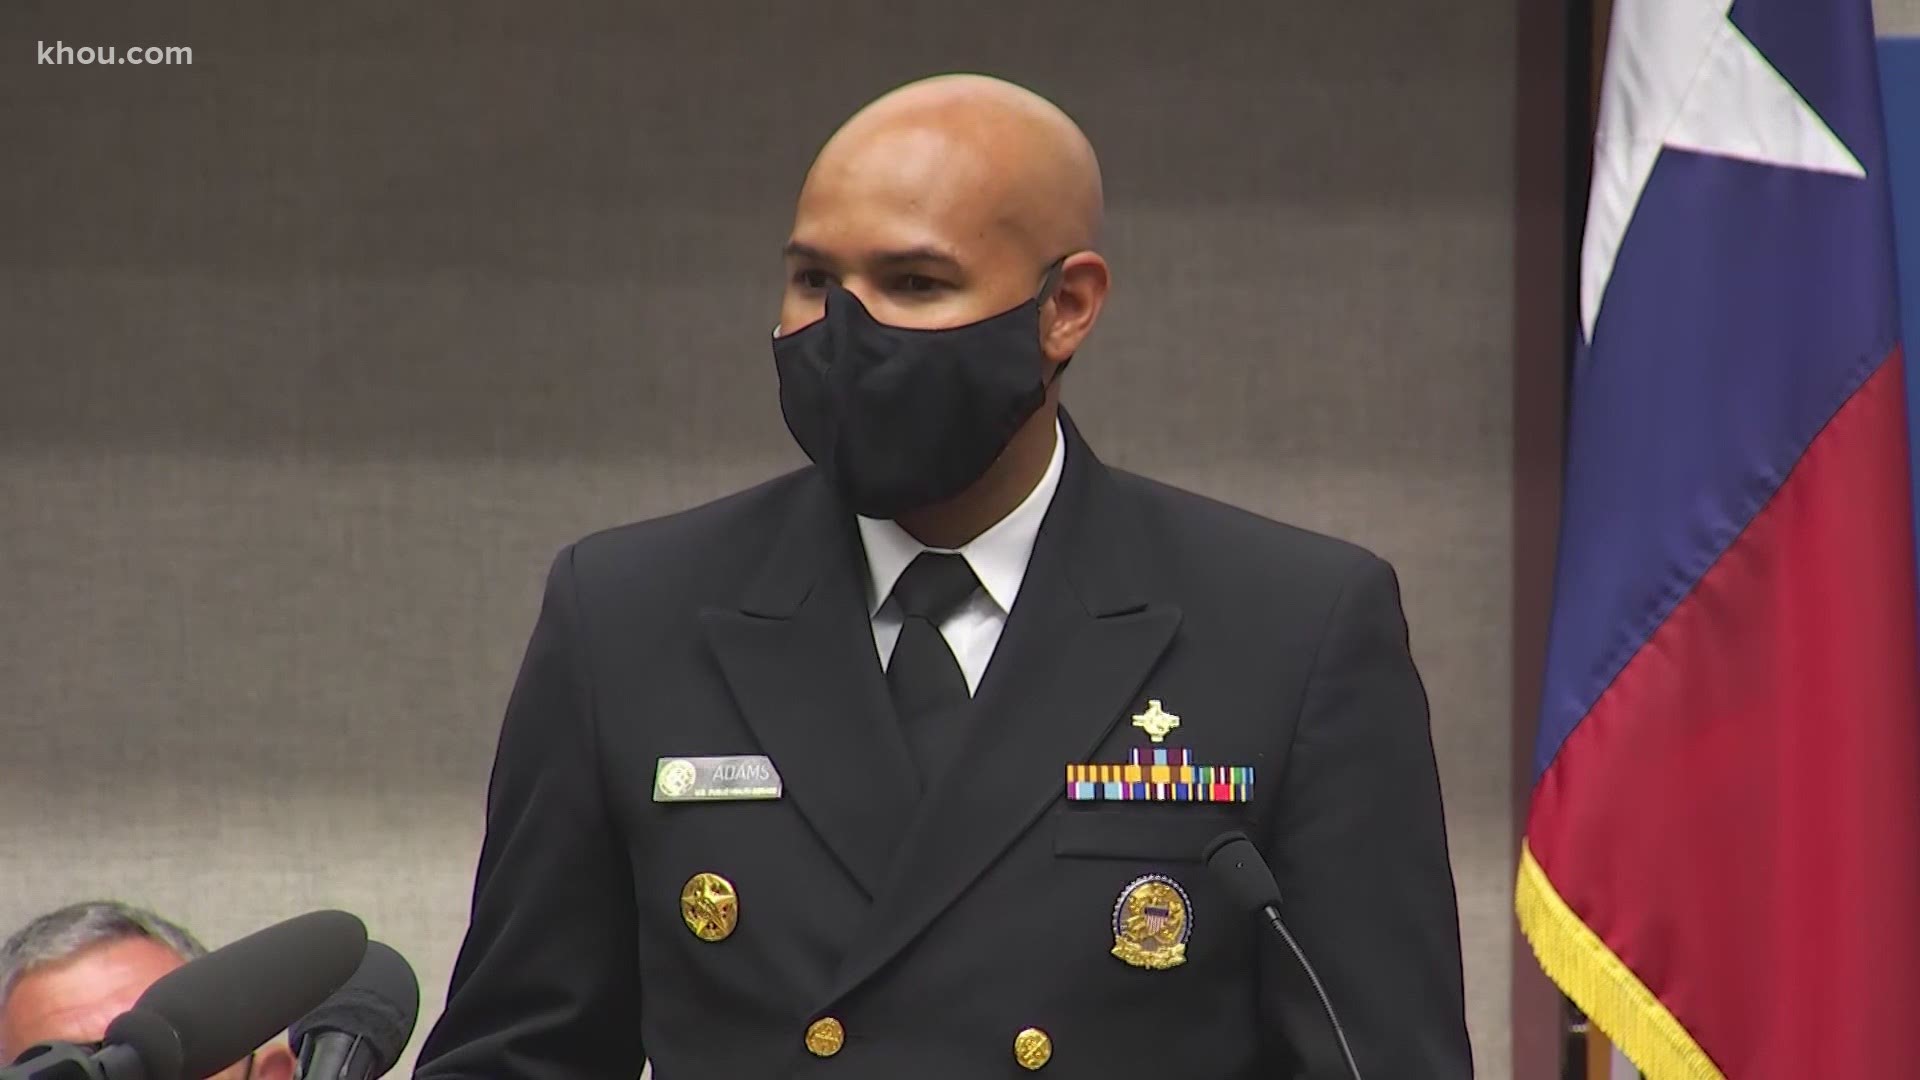 United States Surgeon General Jerome Adams was in Houston on Monday to get an update on the coronavirus vaccine.